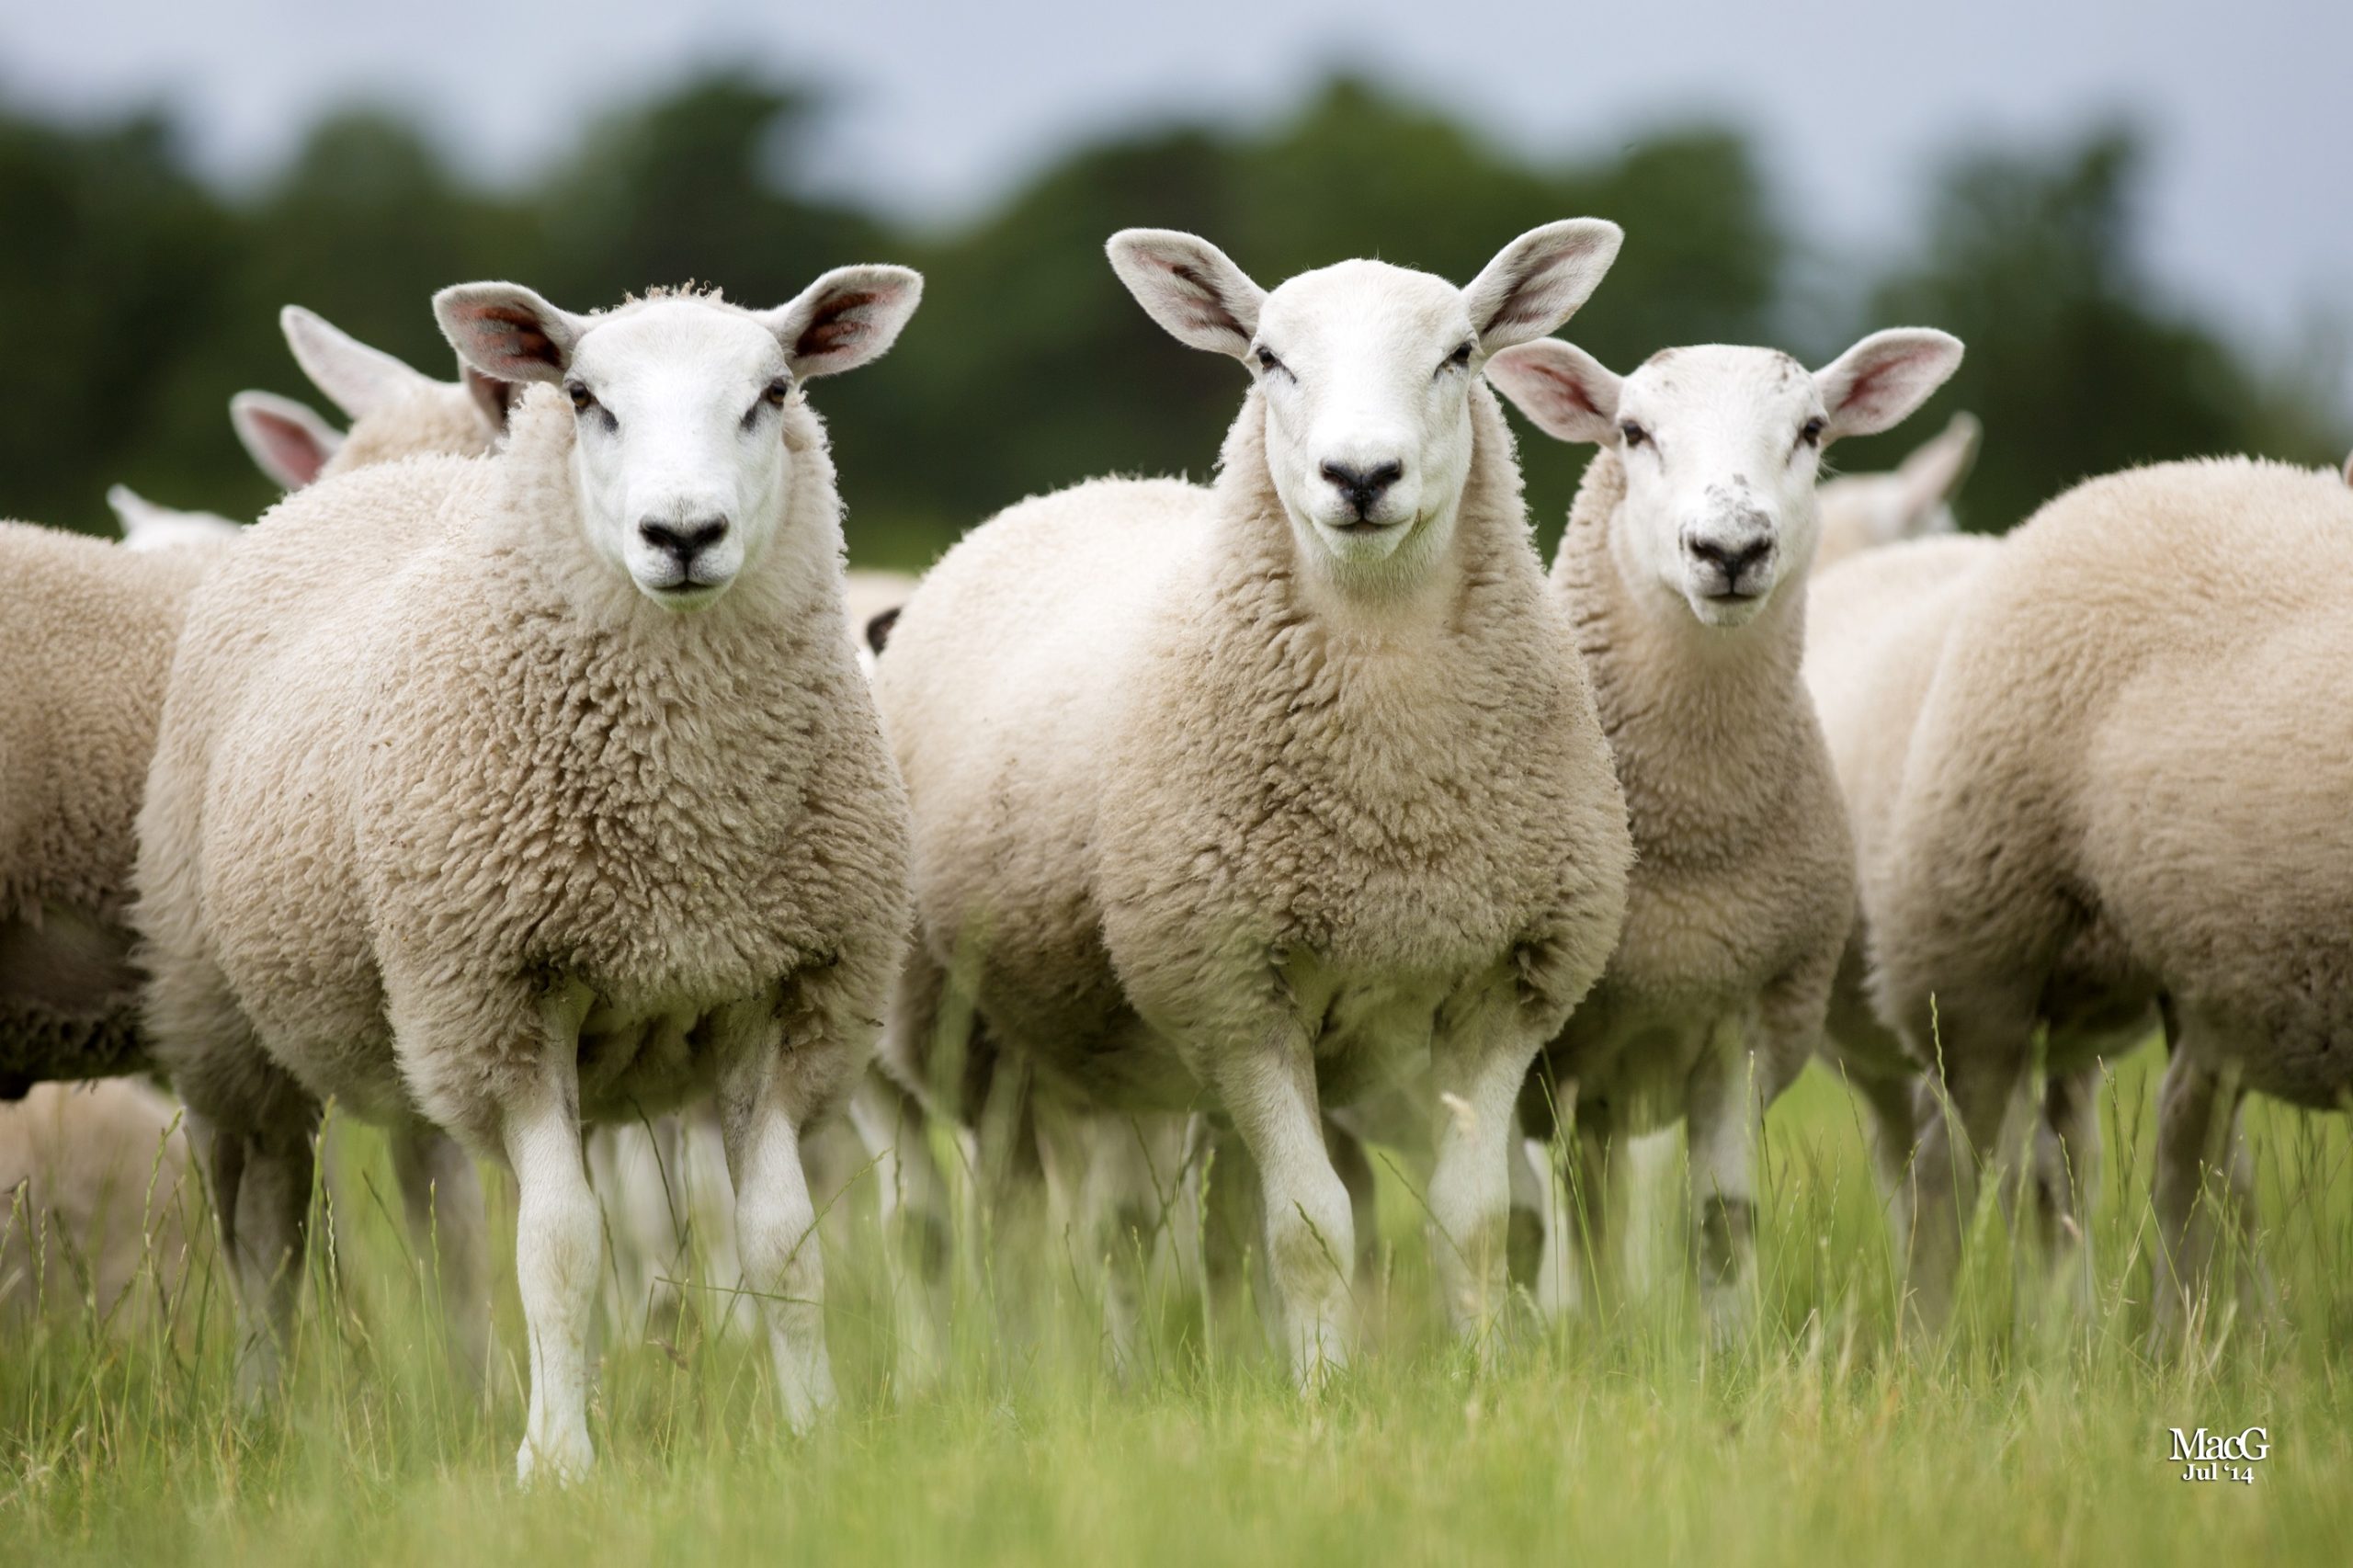 New-research-examines-ways-to-breed-and-feed-sheep-with-reduced-environmental-impact-scaled.jpg